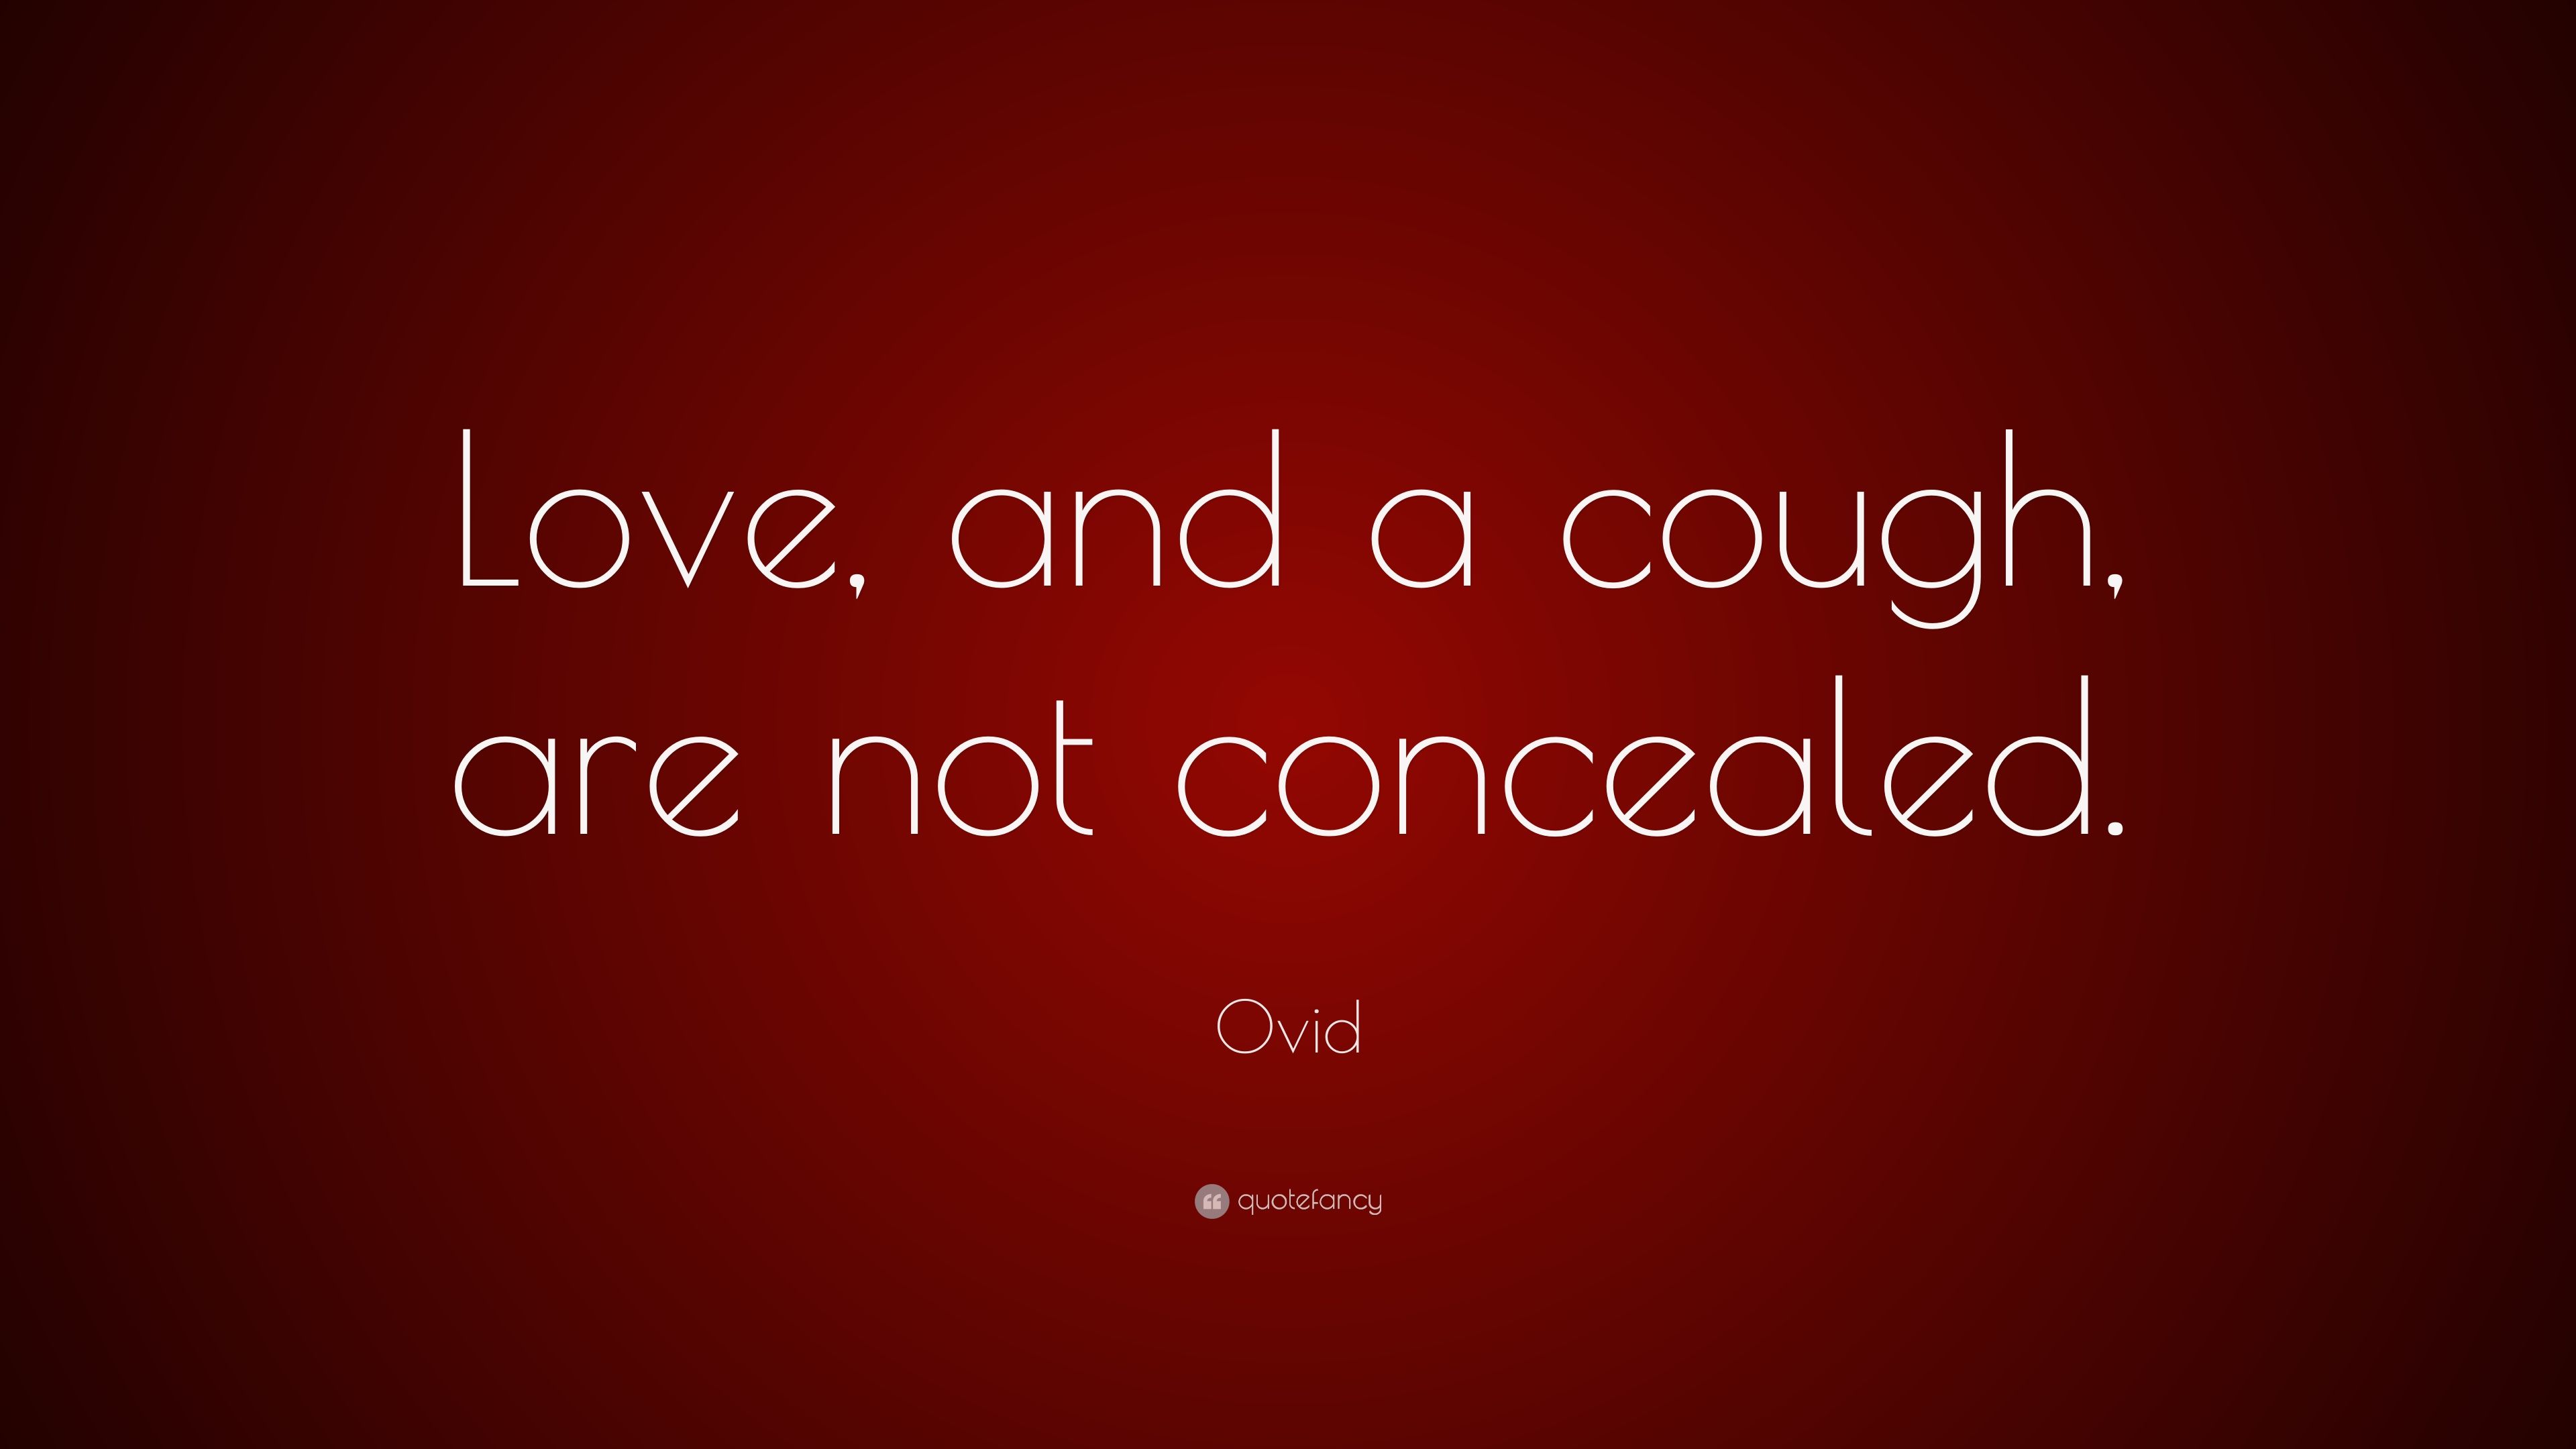 Ovid Quote: “Love, and a cough, are not concealed.” 9 wallpaper